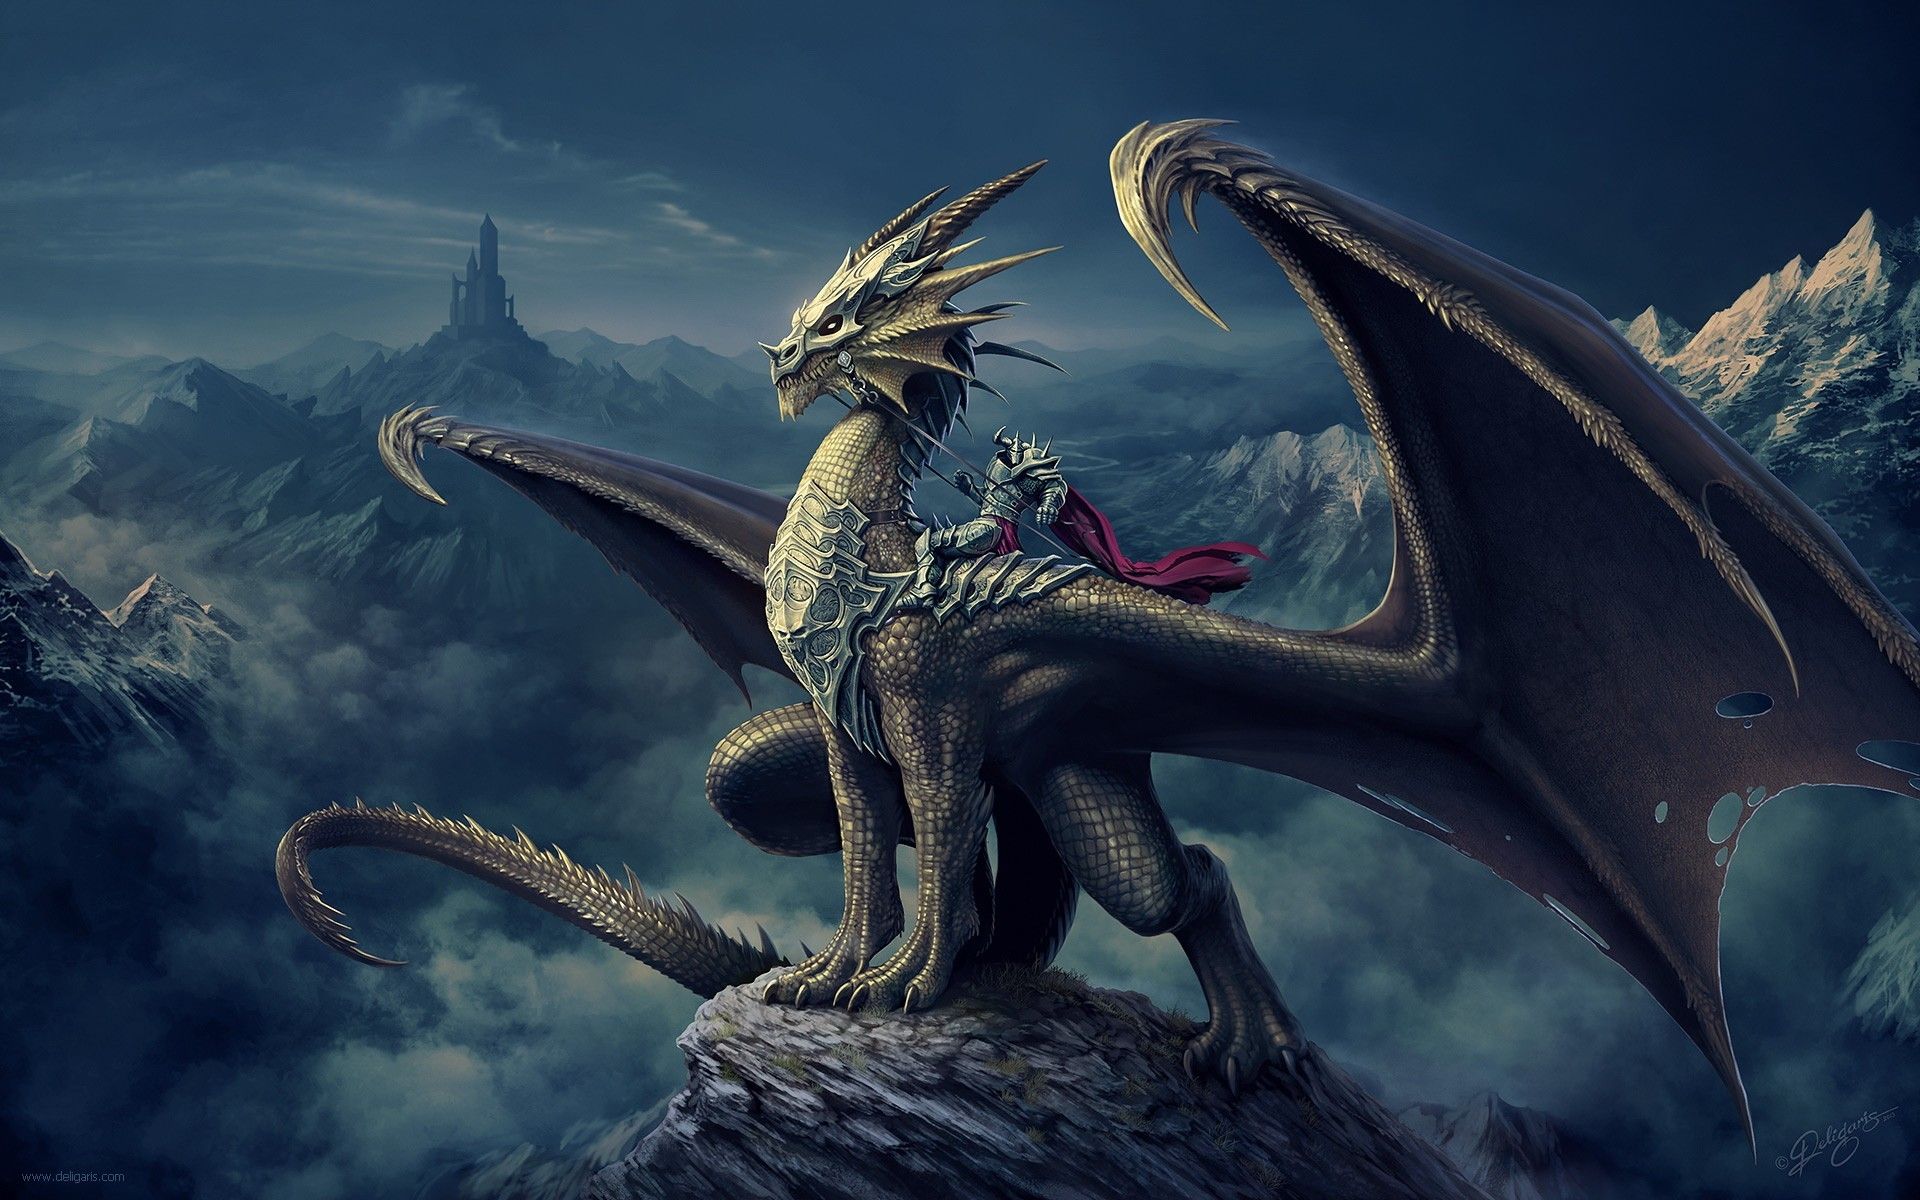 Cool Dragon Backgrounds For Computers That Move